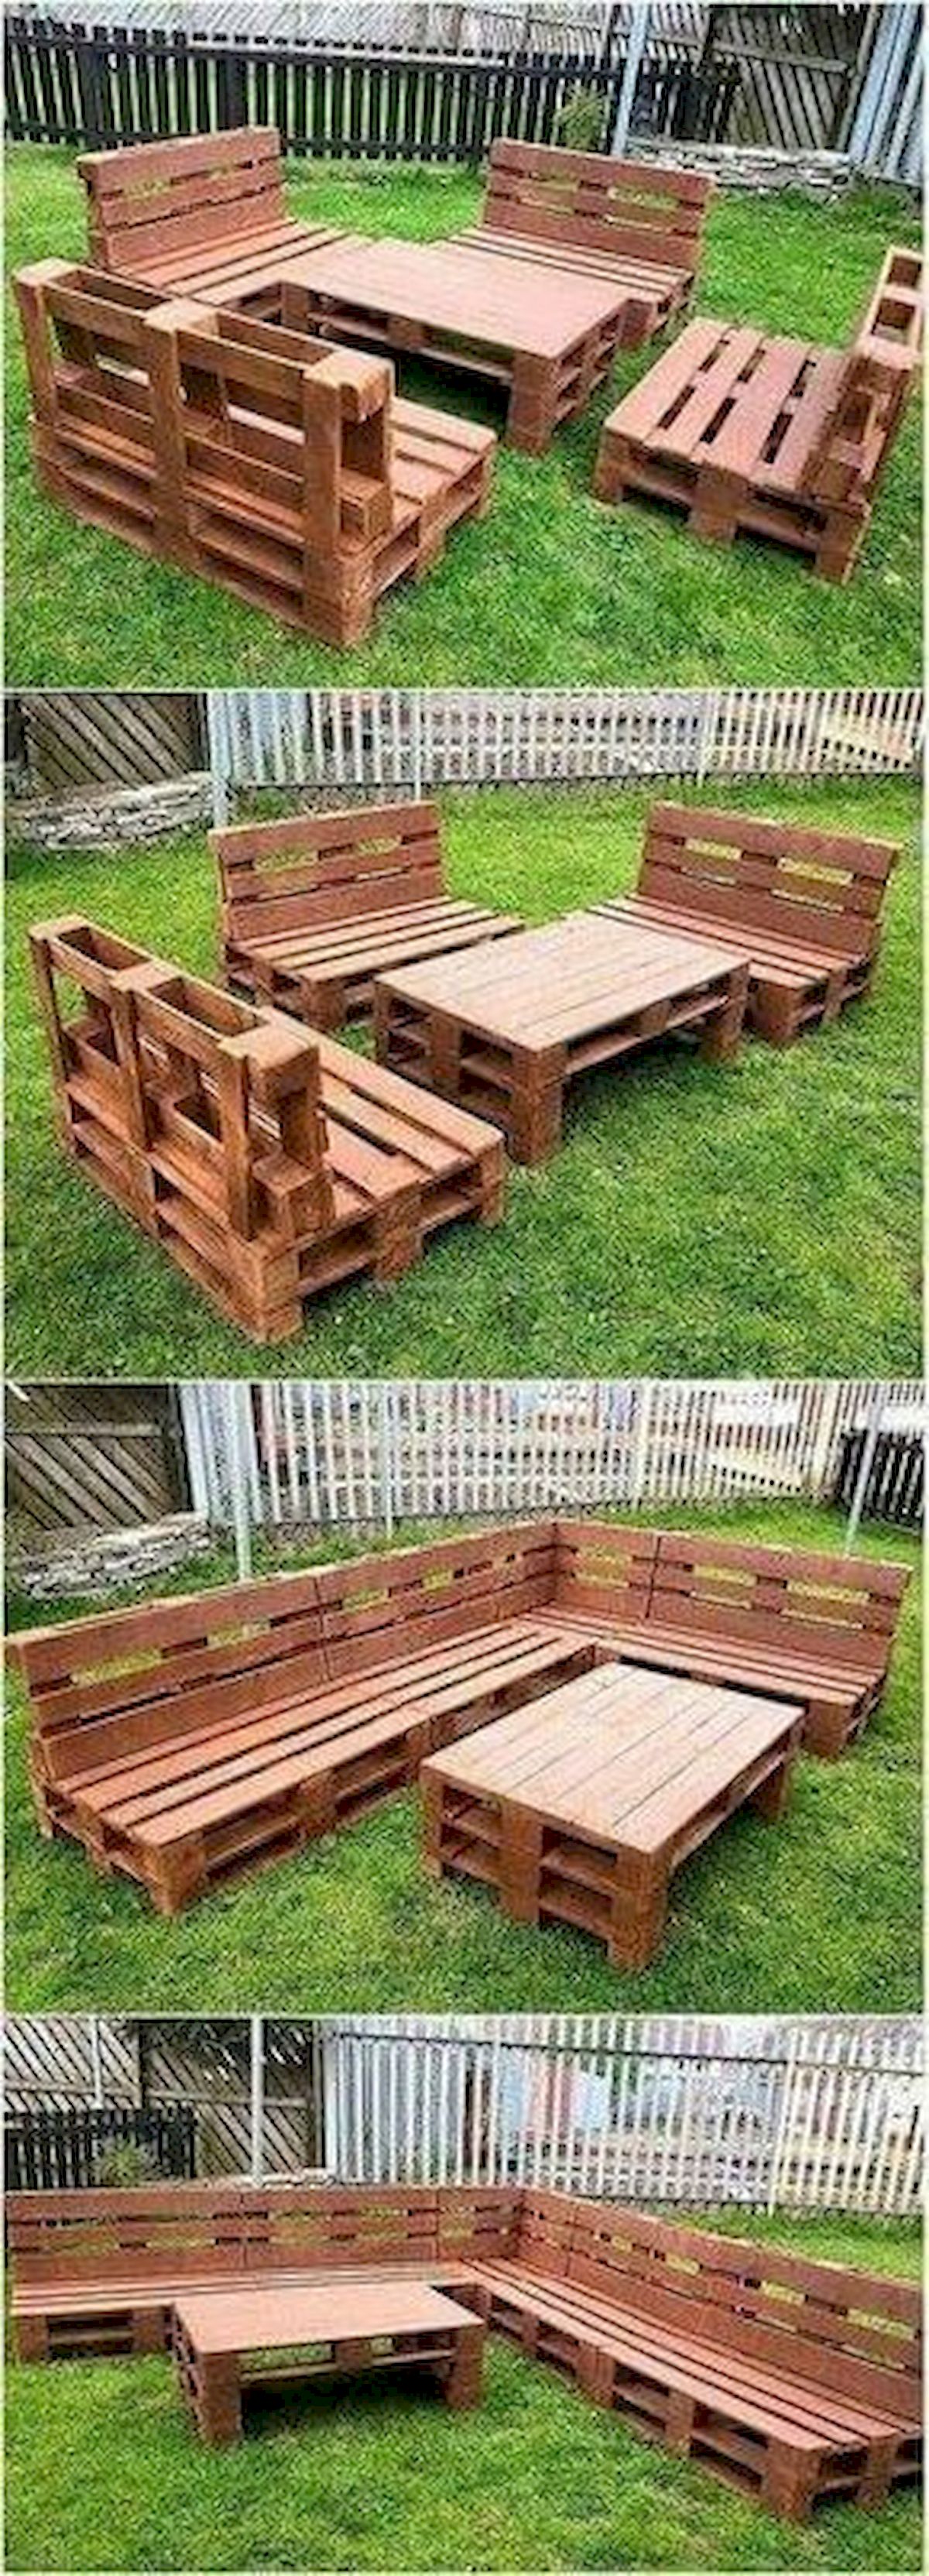 50 Amazing DIY Projects Outdoor Furniture Design Ideas (6)